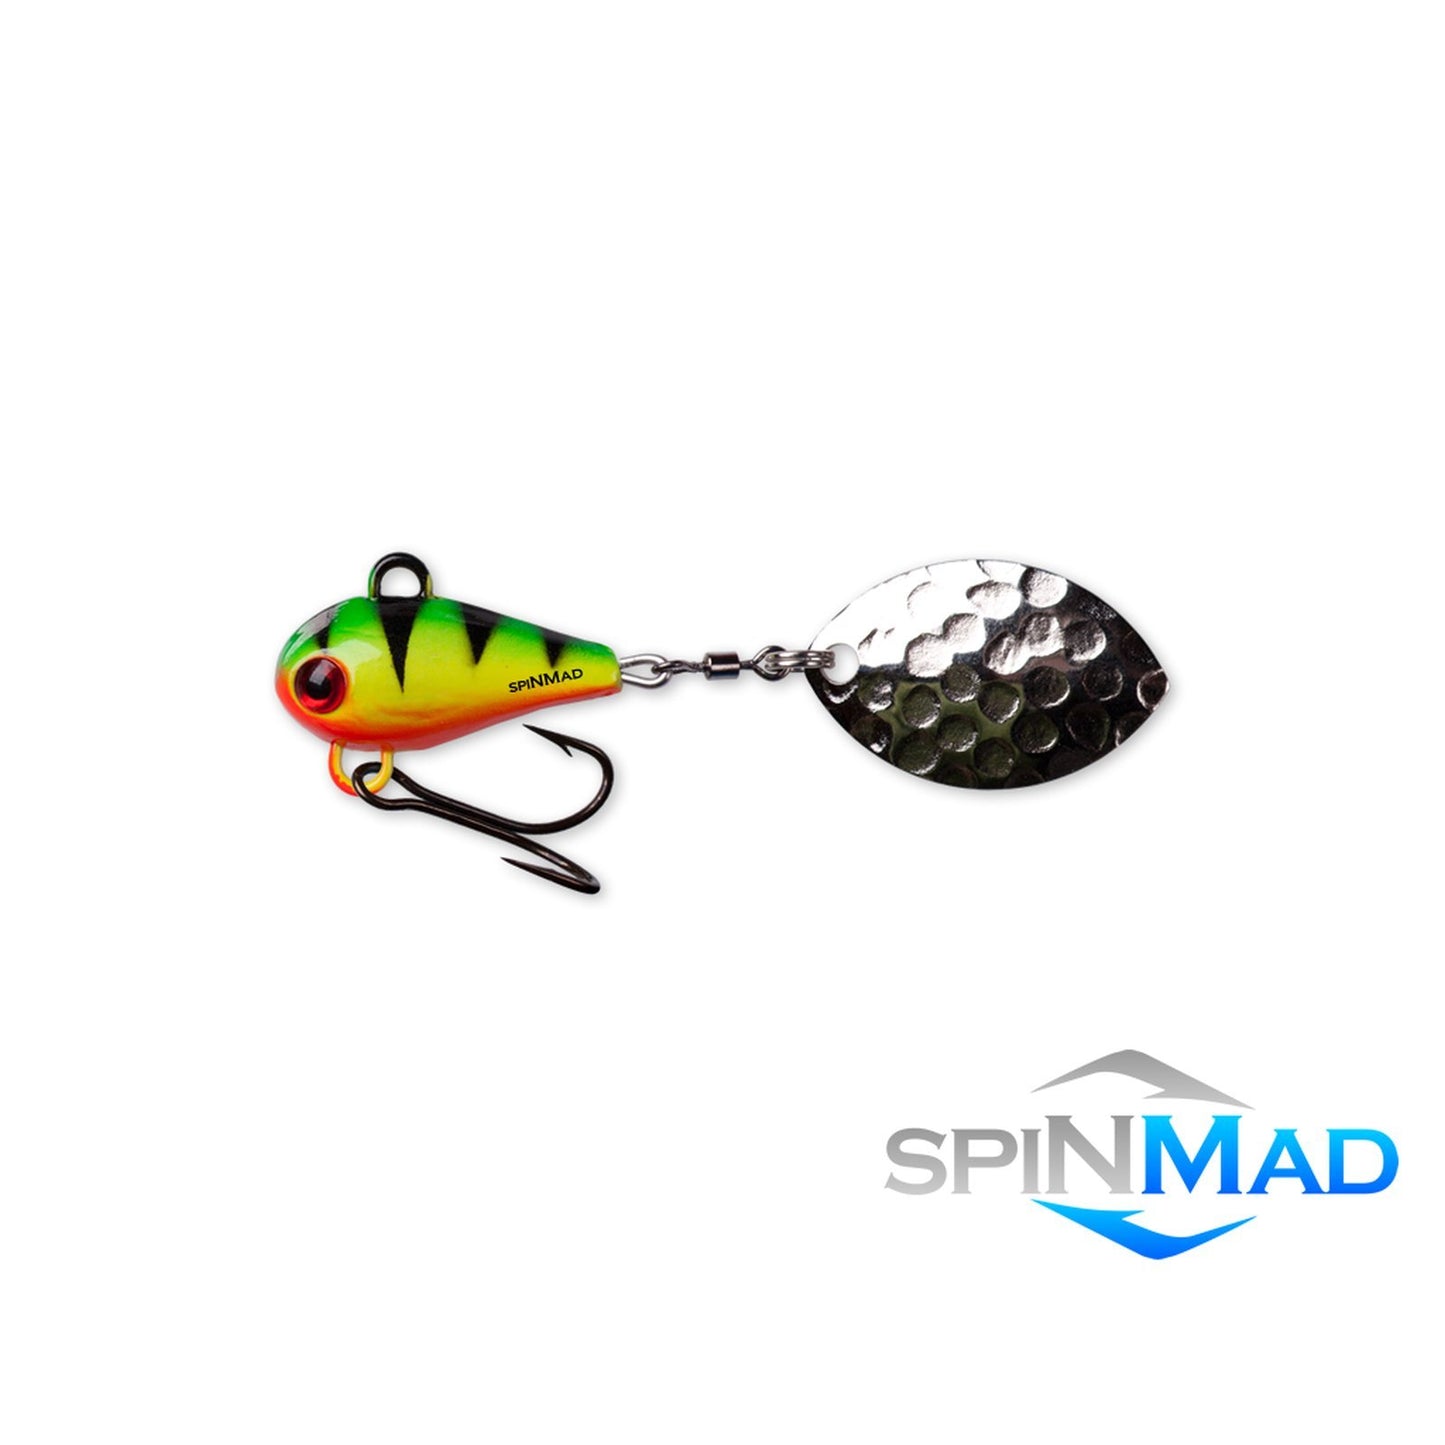 SpinMad MAG 6 0710